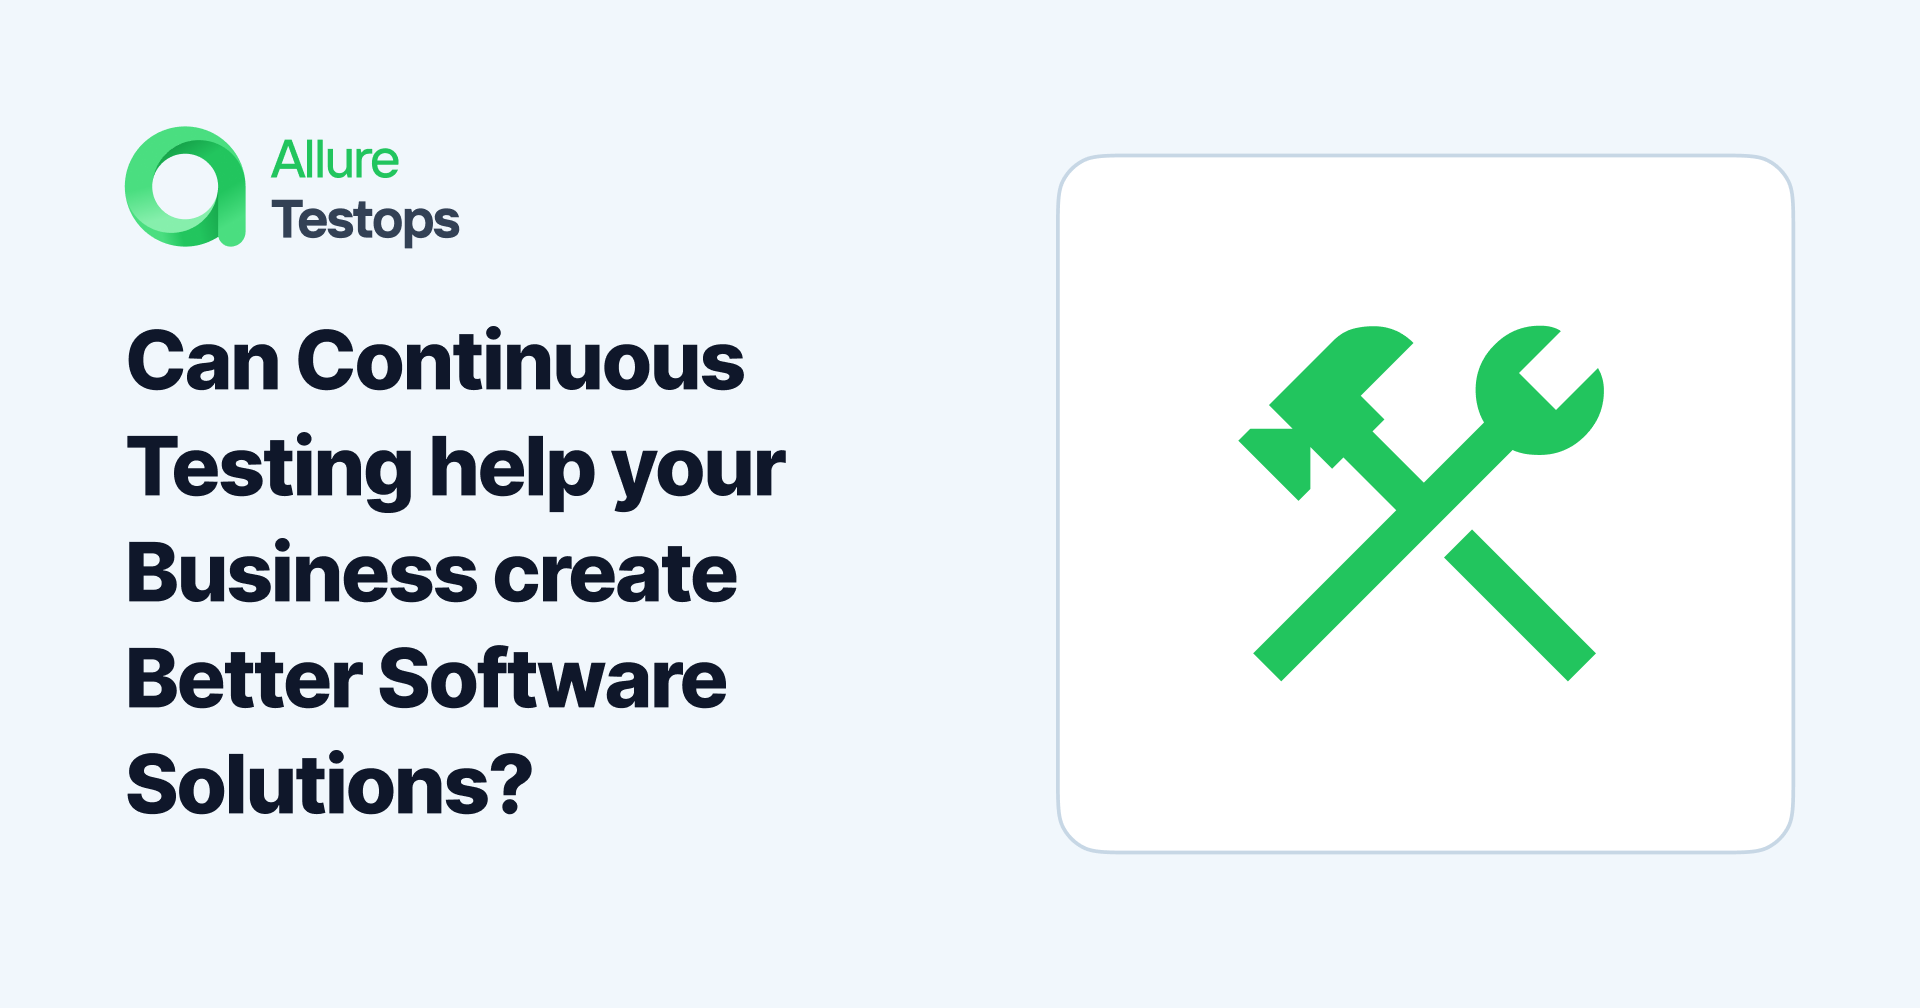 Can Continuous Testing help your Business create Better Software Solutions?